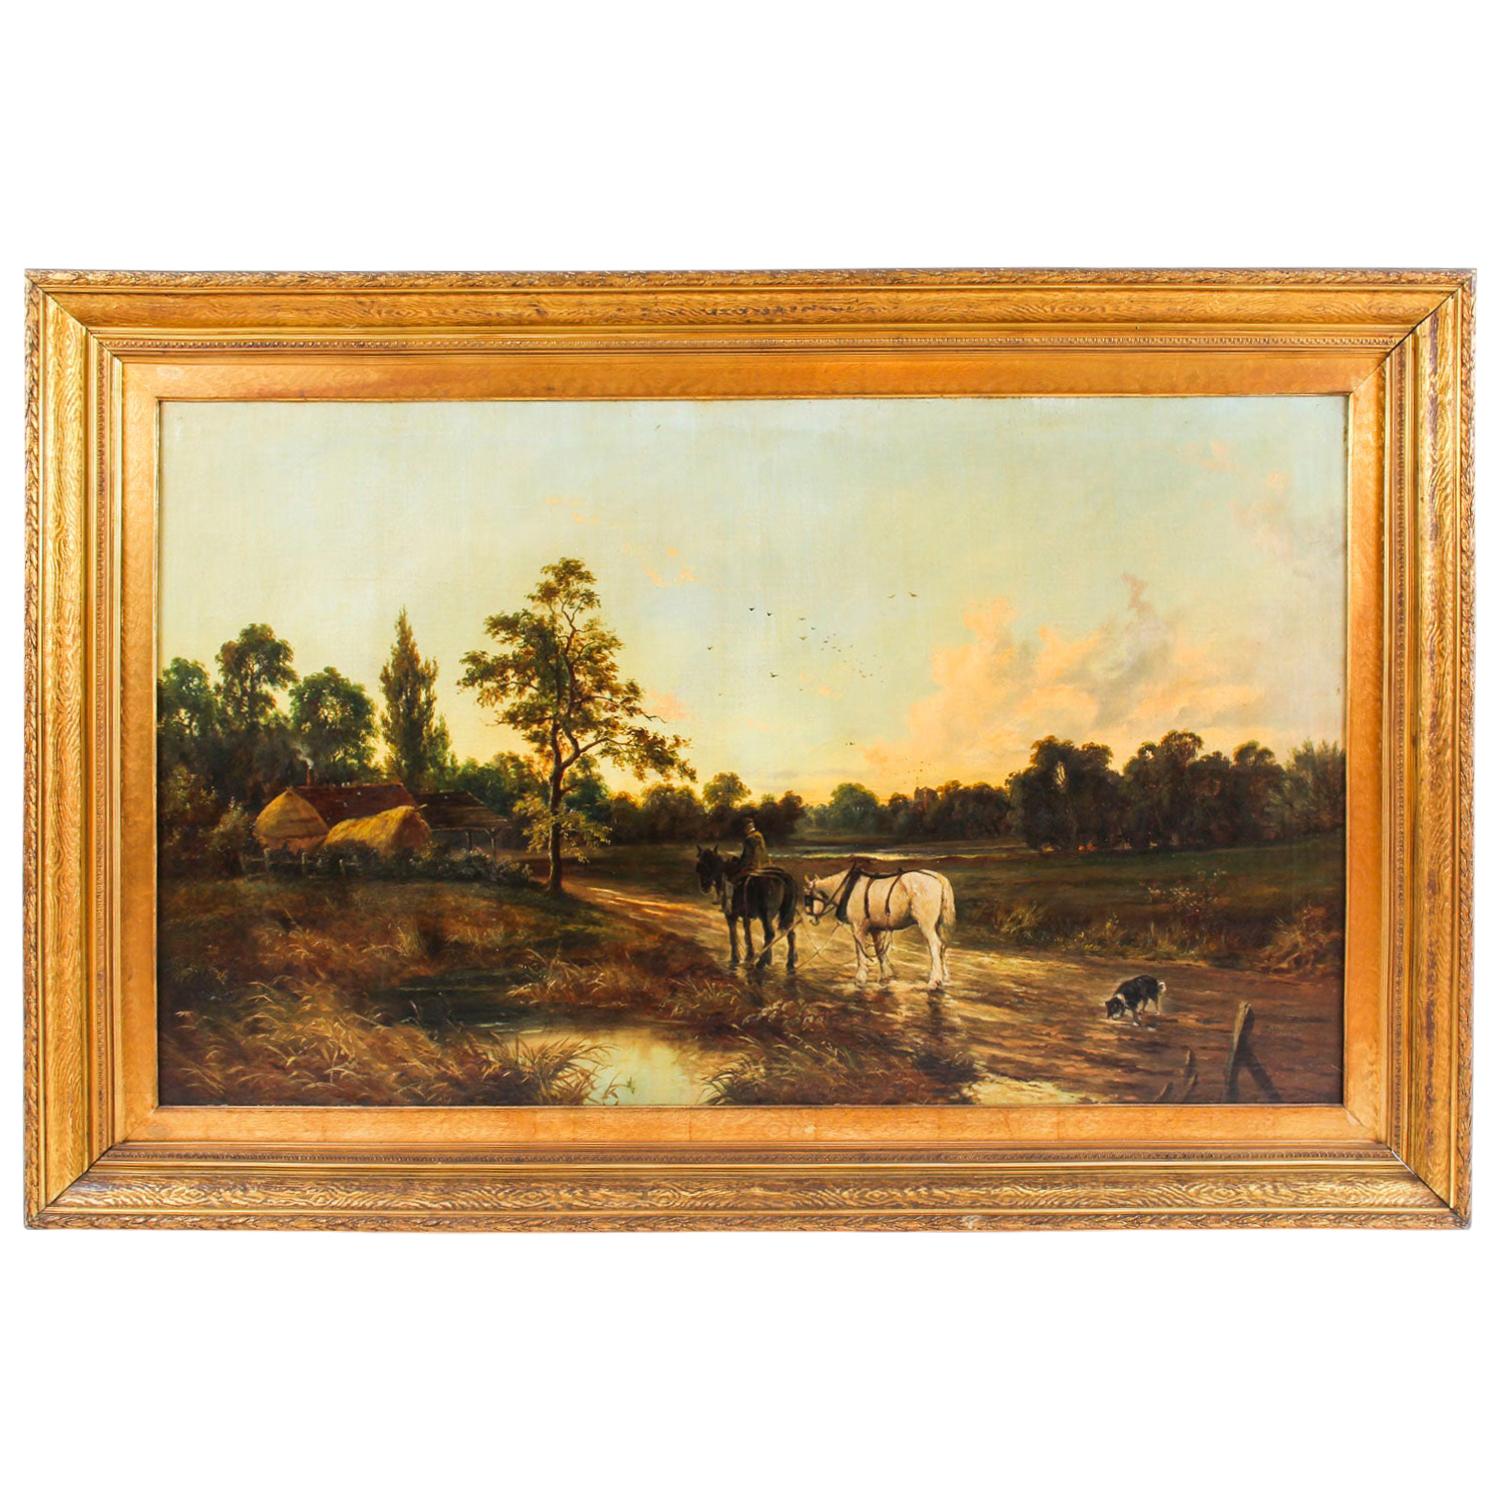 Antique Oil on Canvas Landscape Painting by G. Mallet, 19th Century